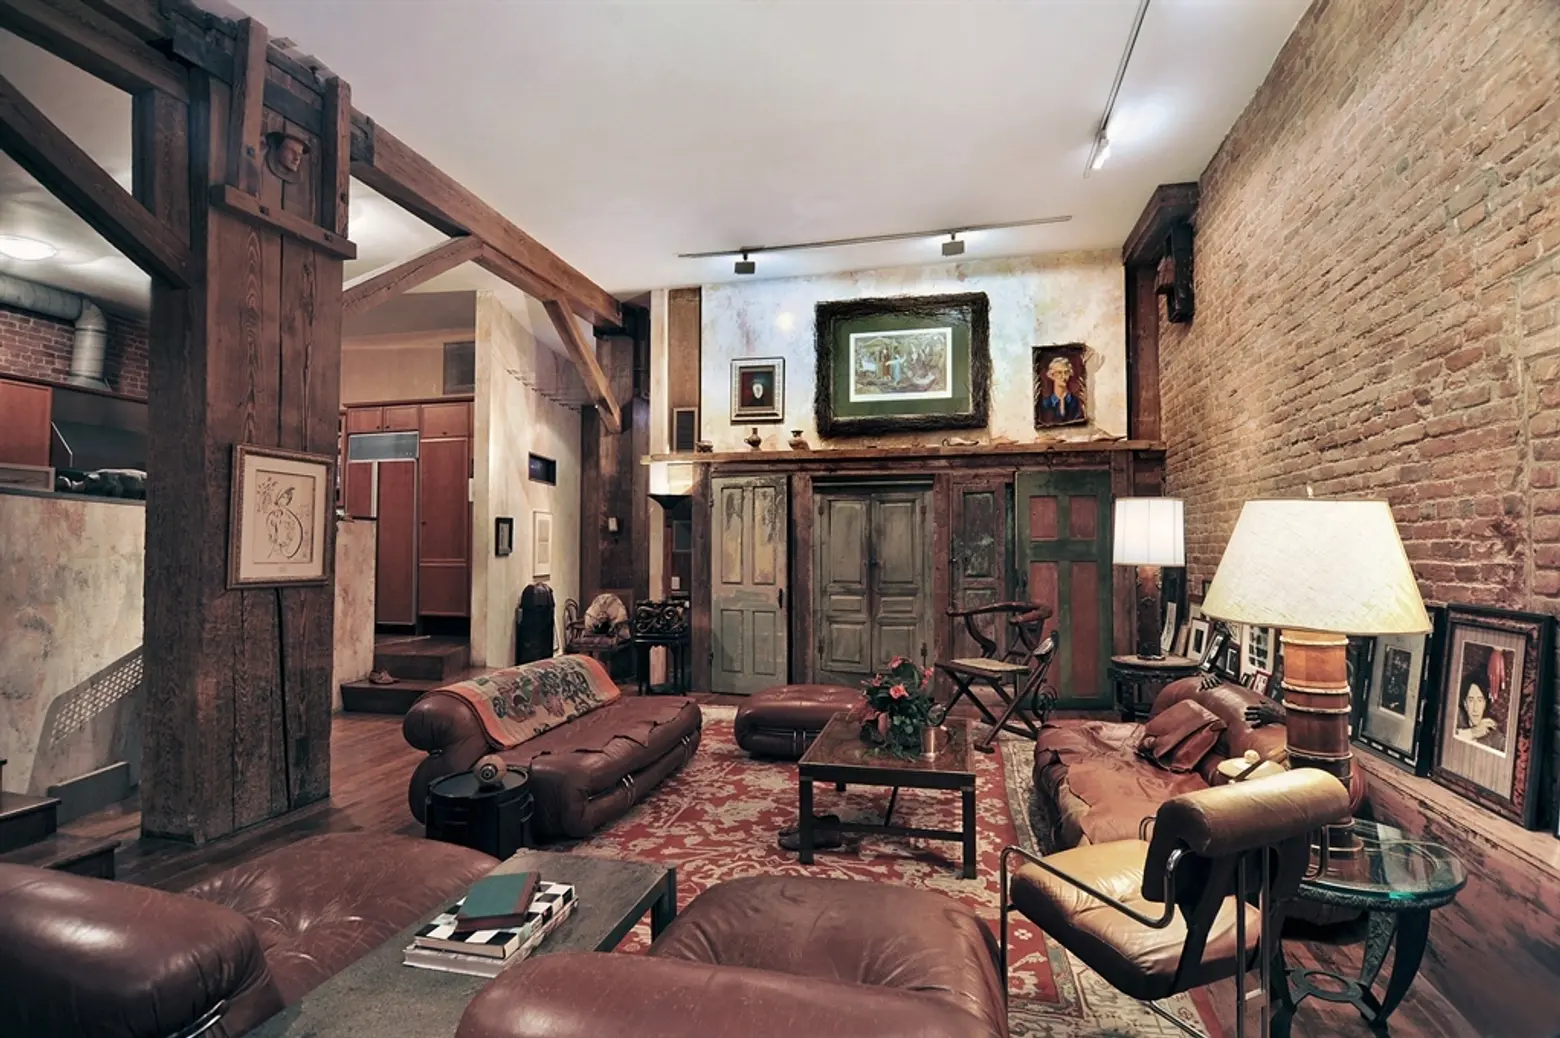 719 Greenwich Street, apartment made of salvaged ship parts, exposed beams